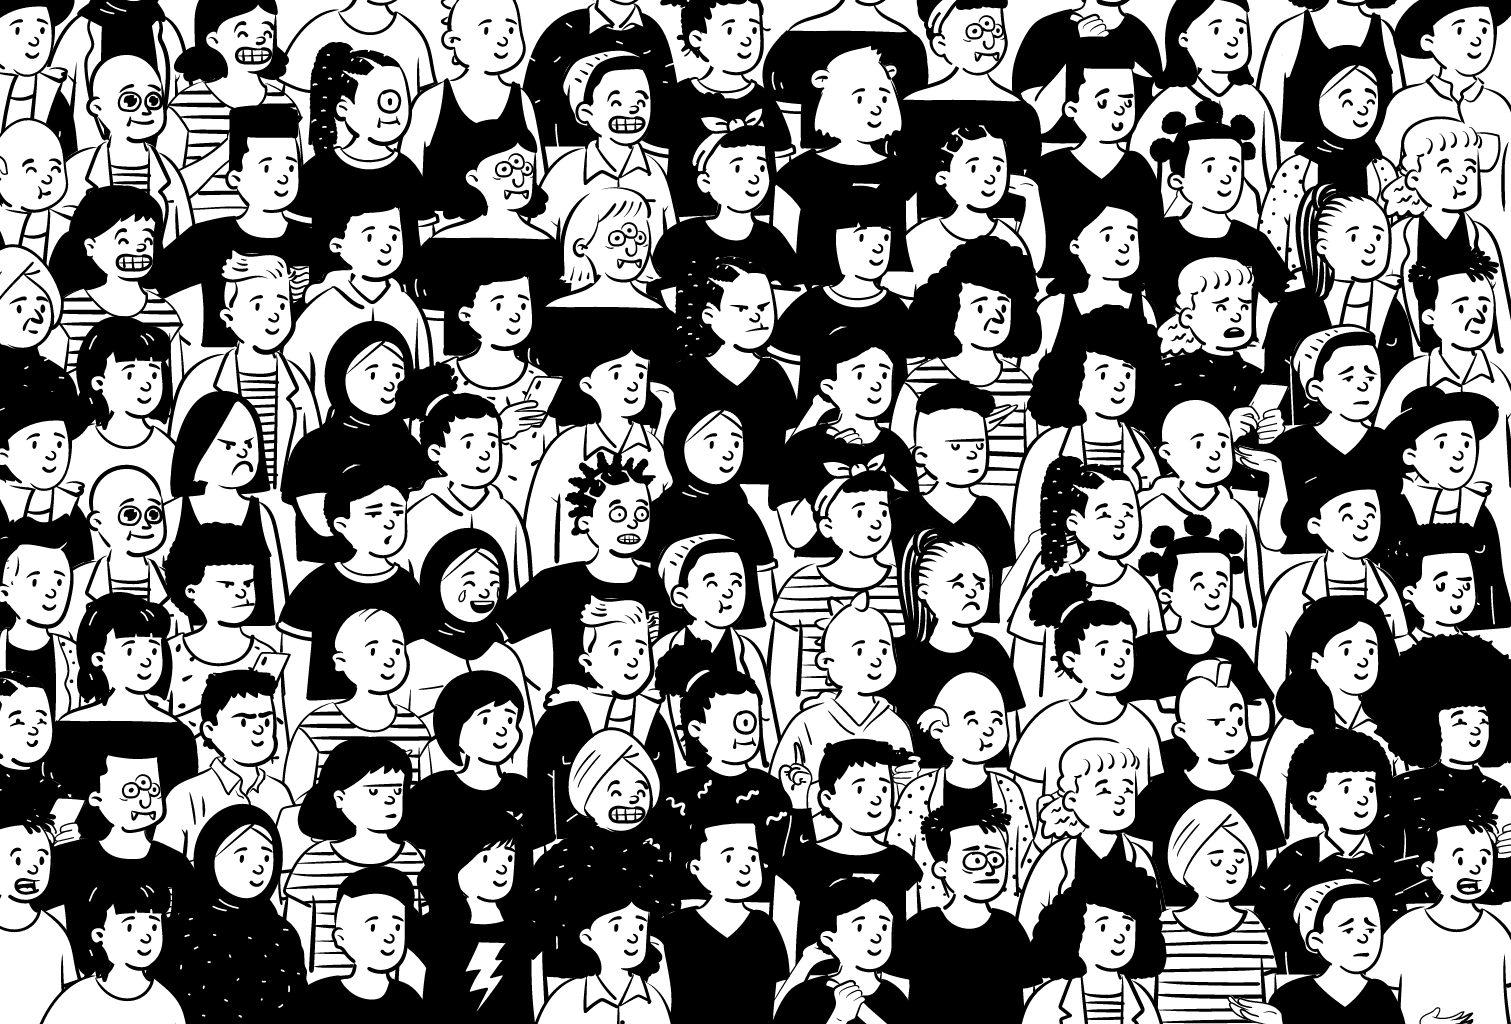 An image showing a large collection of monochrome avatars, each with a different hairstyle, facial expression and hair style